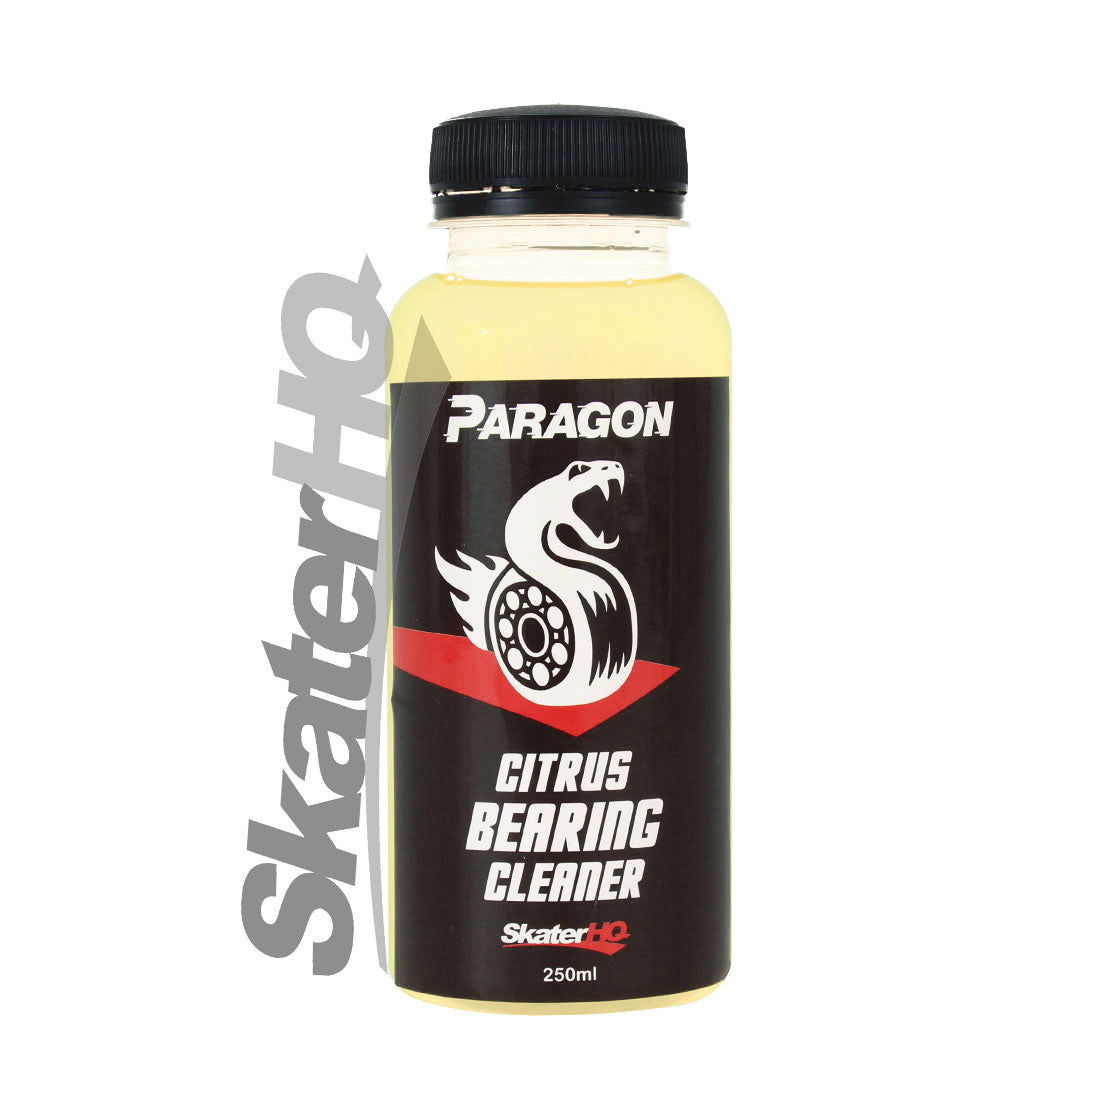 Paragon Citrus Bearing Cleaner 250ml Inline Hardware and Parts